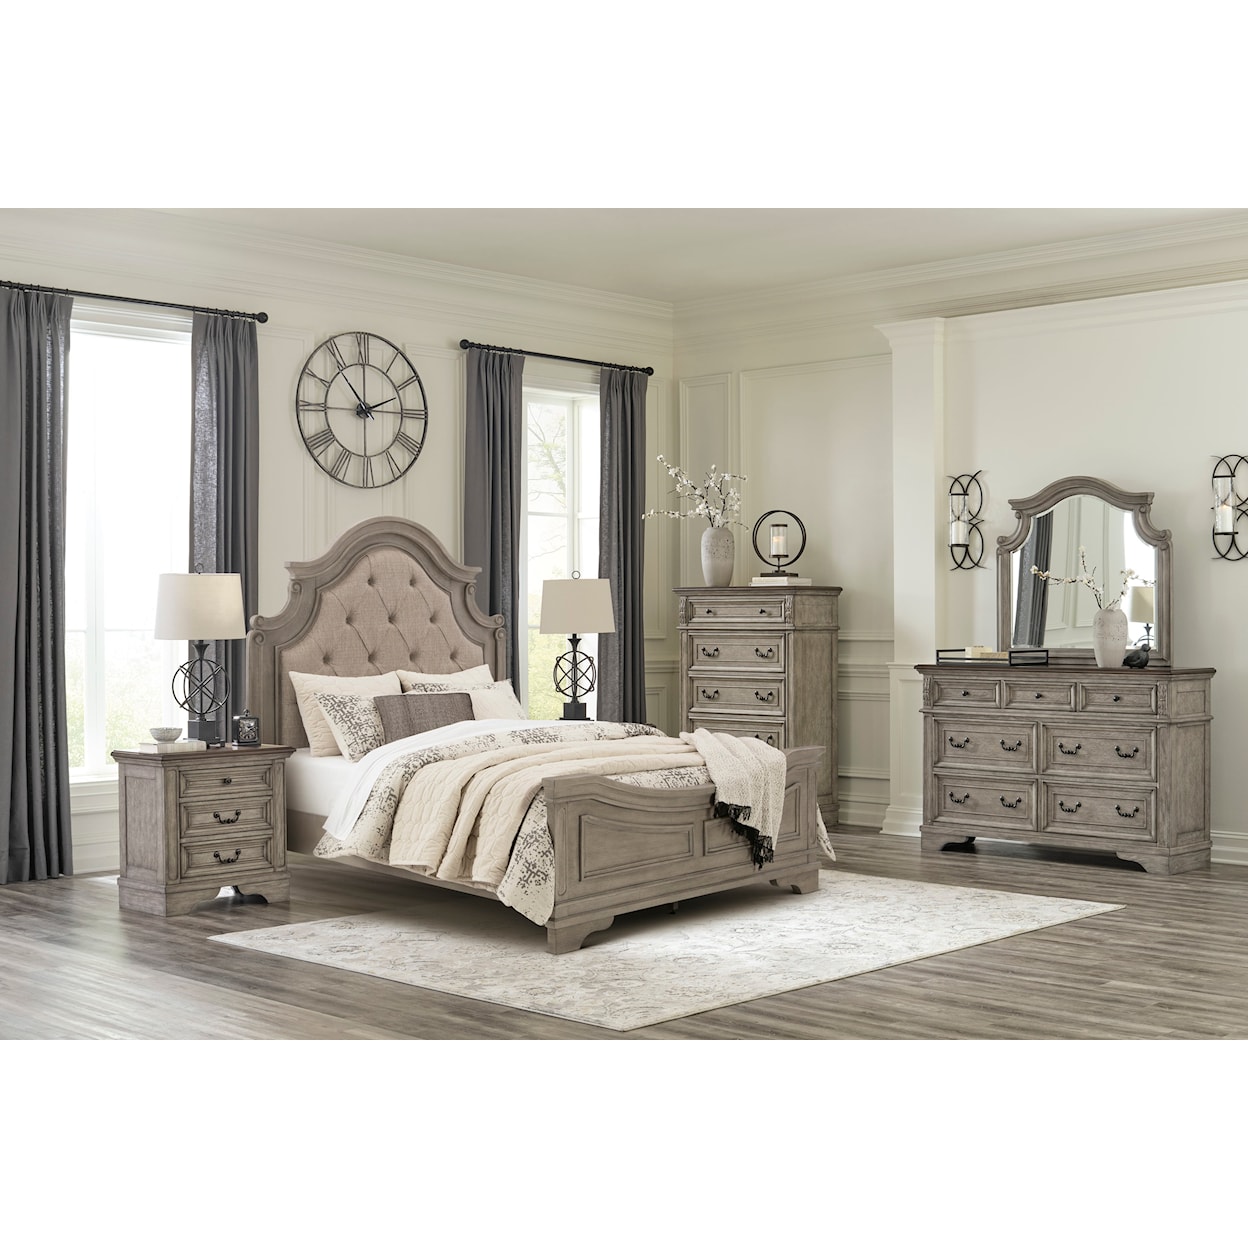 Signature Design by Ashley Lodenbay 6 Piece Queen Bedroom Set